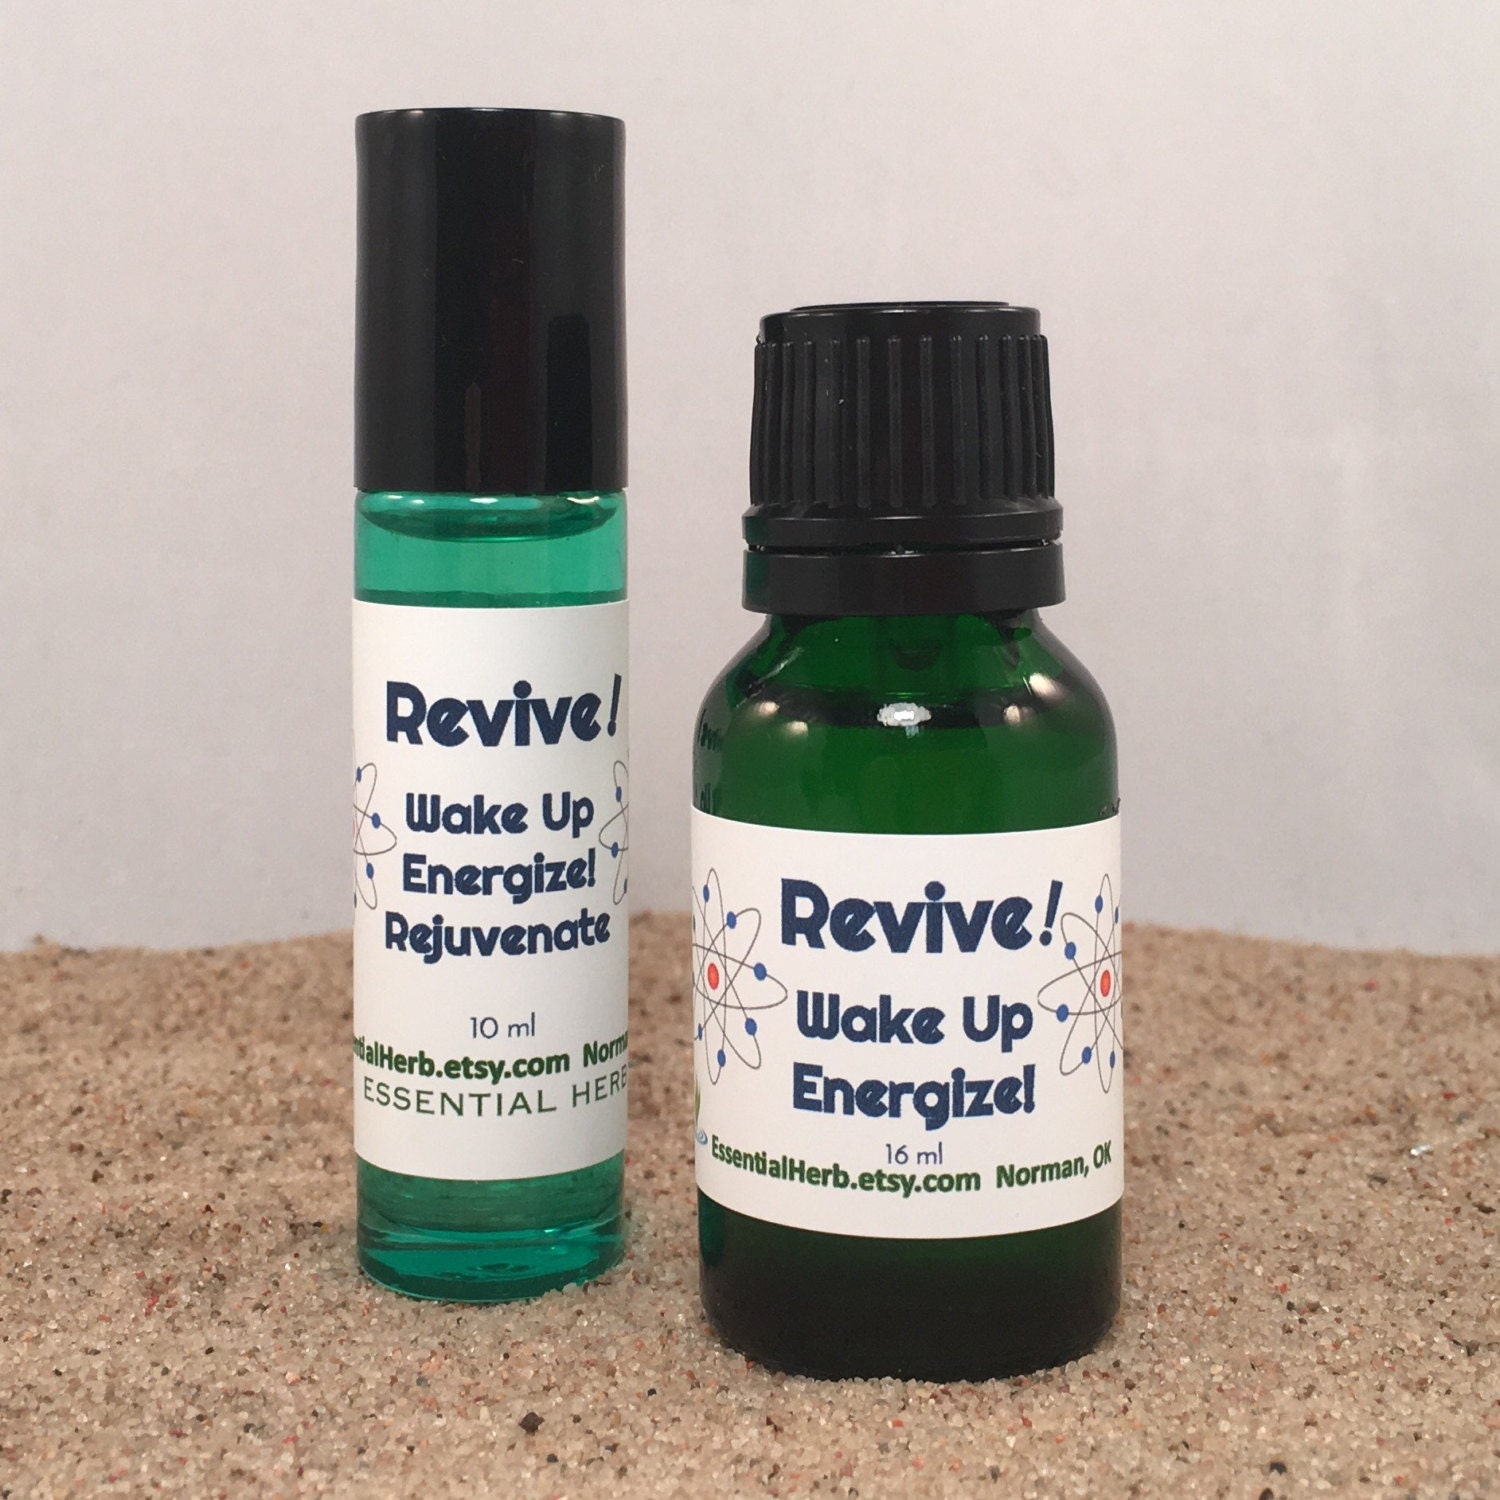 Energy Revive Essential Oil Blend, Energize Cognitive Function, Wake Up, Alertness, Focus, Pure Therapeutic Grade